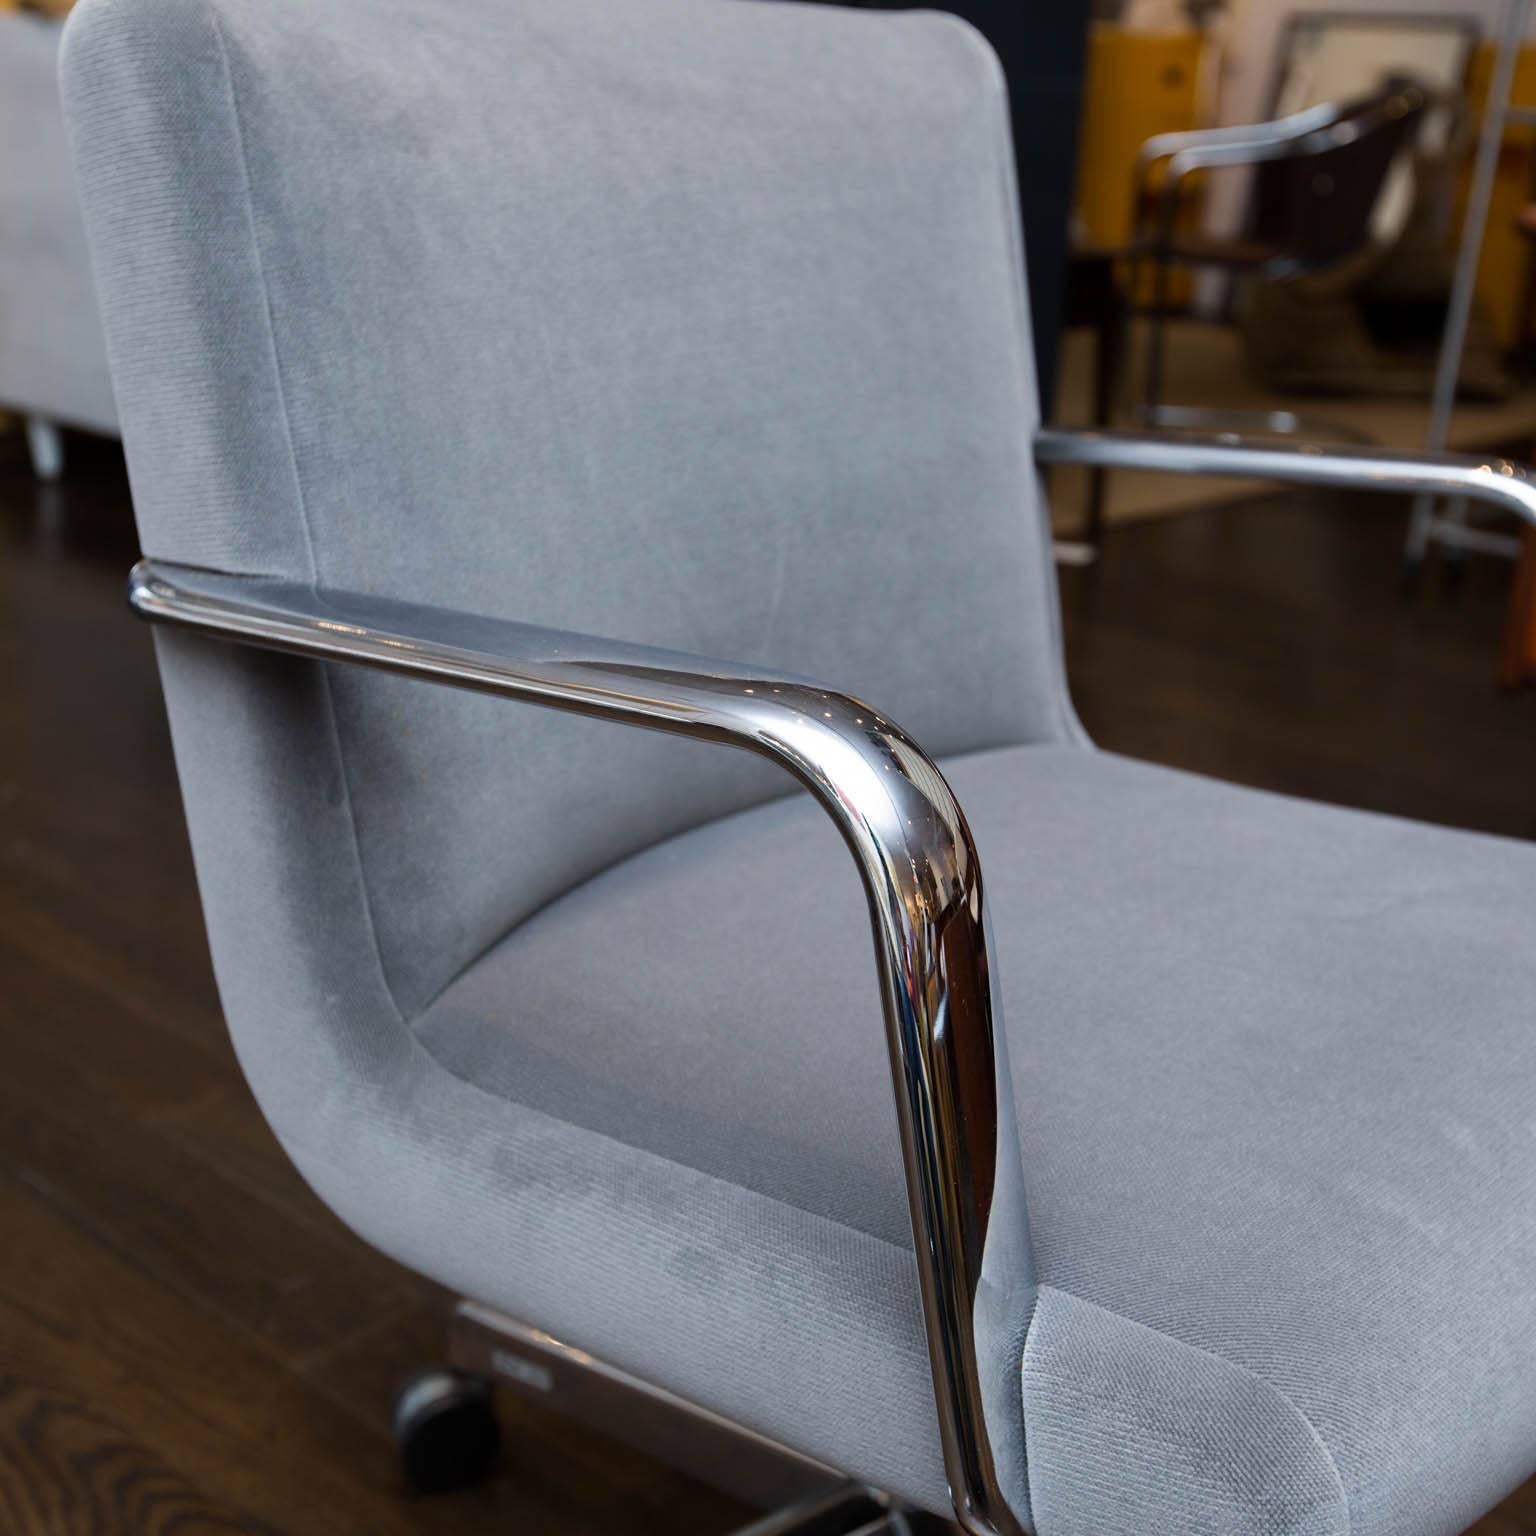 Newly reupholstered in cotton velvet, this vintage office chair on castors is perfect match for your MCM desk.